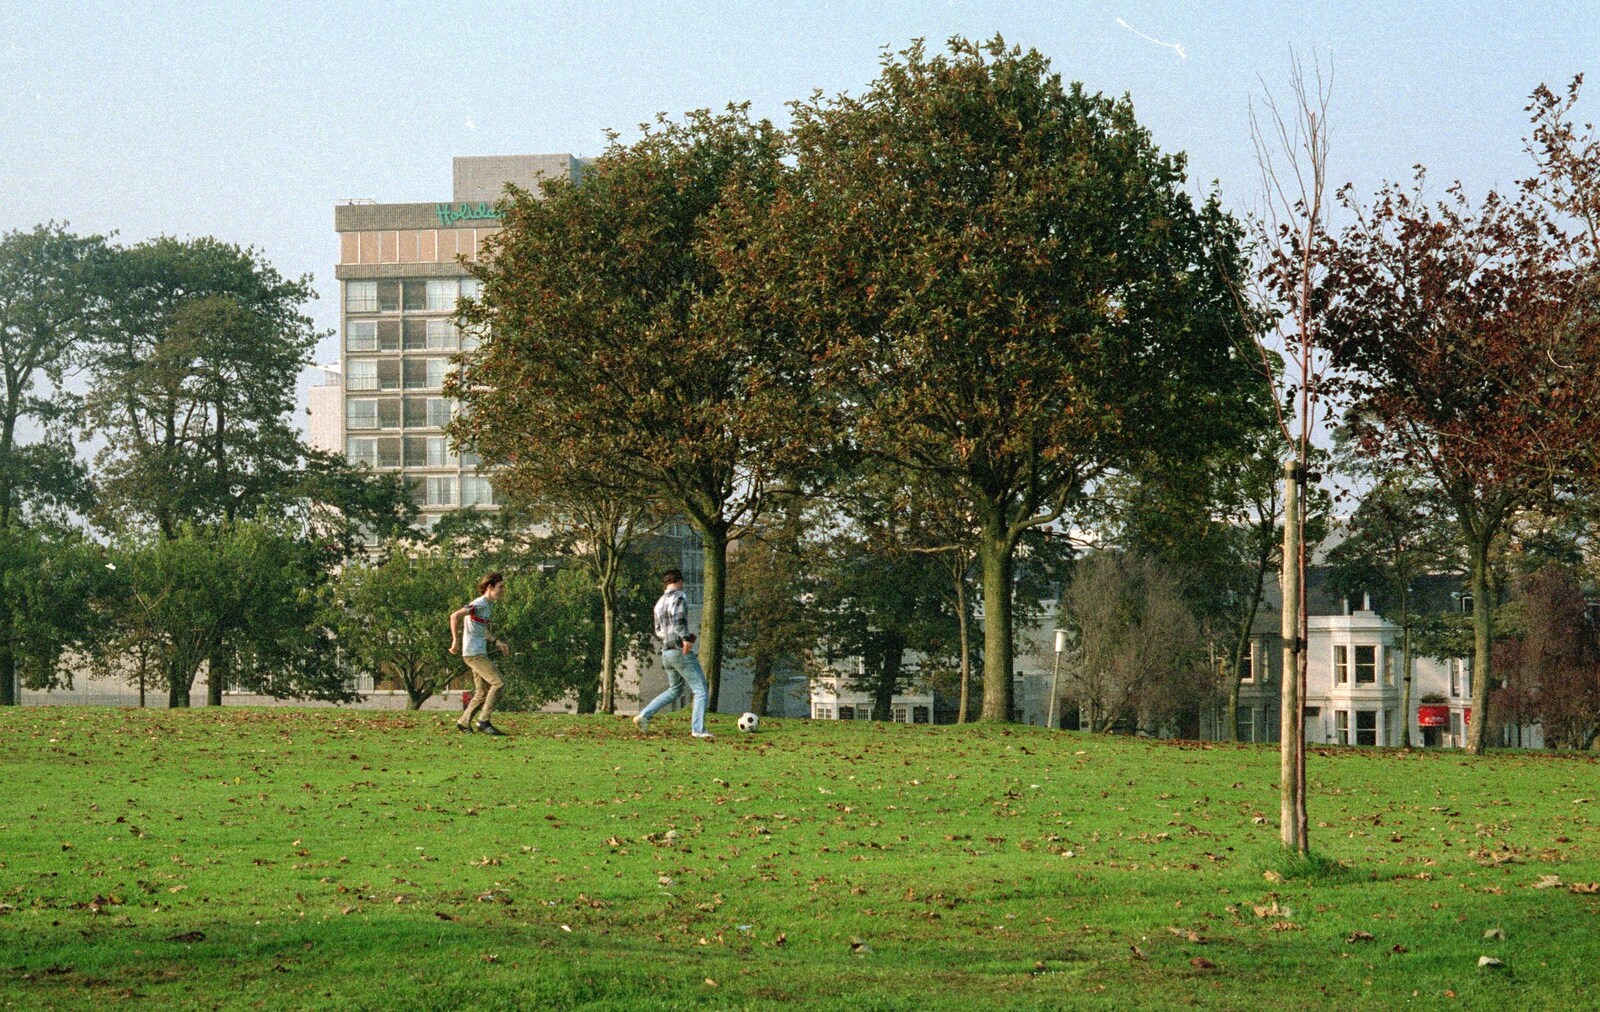 Dave and Riki kick about in the park behind the Holiday Inn from Uni: A Plymouth Hoe Kickabout, Plymouth, Devon - 20th October 1986